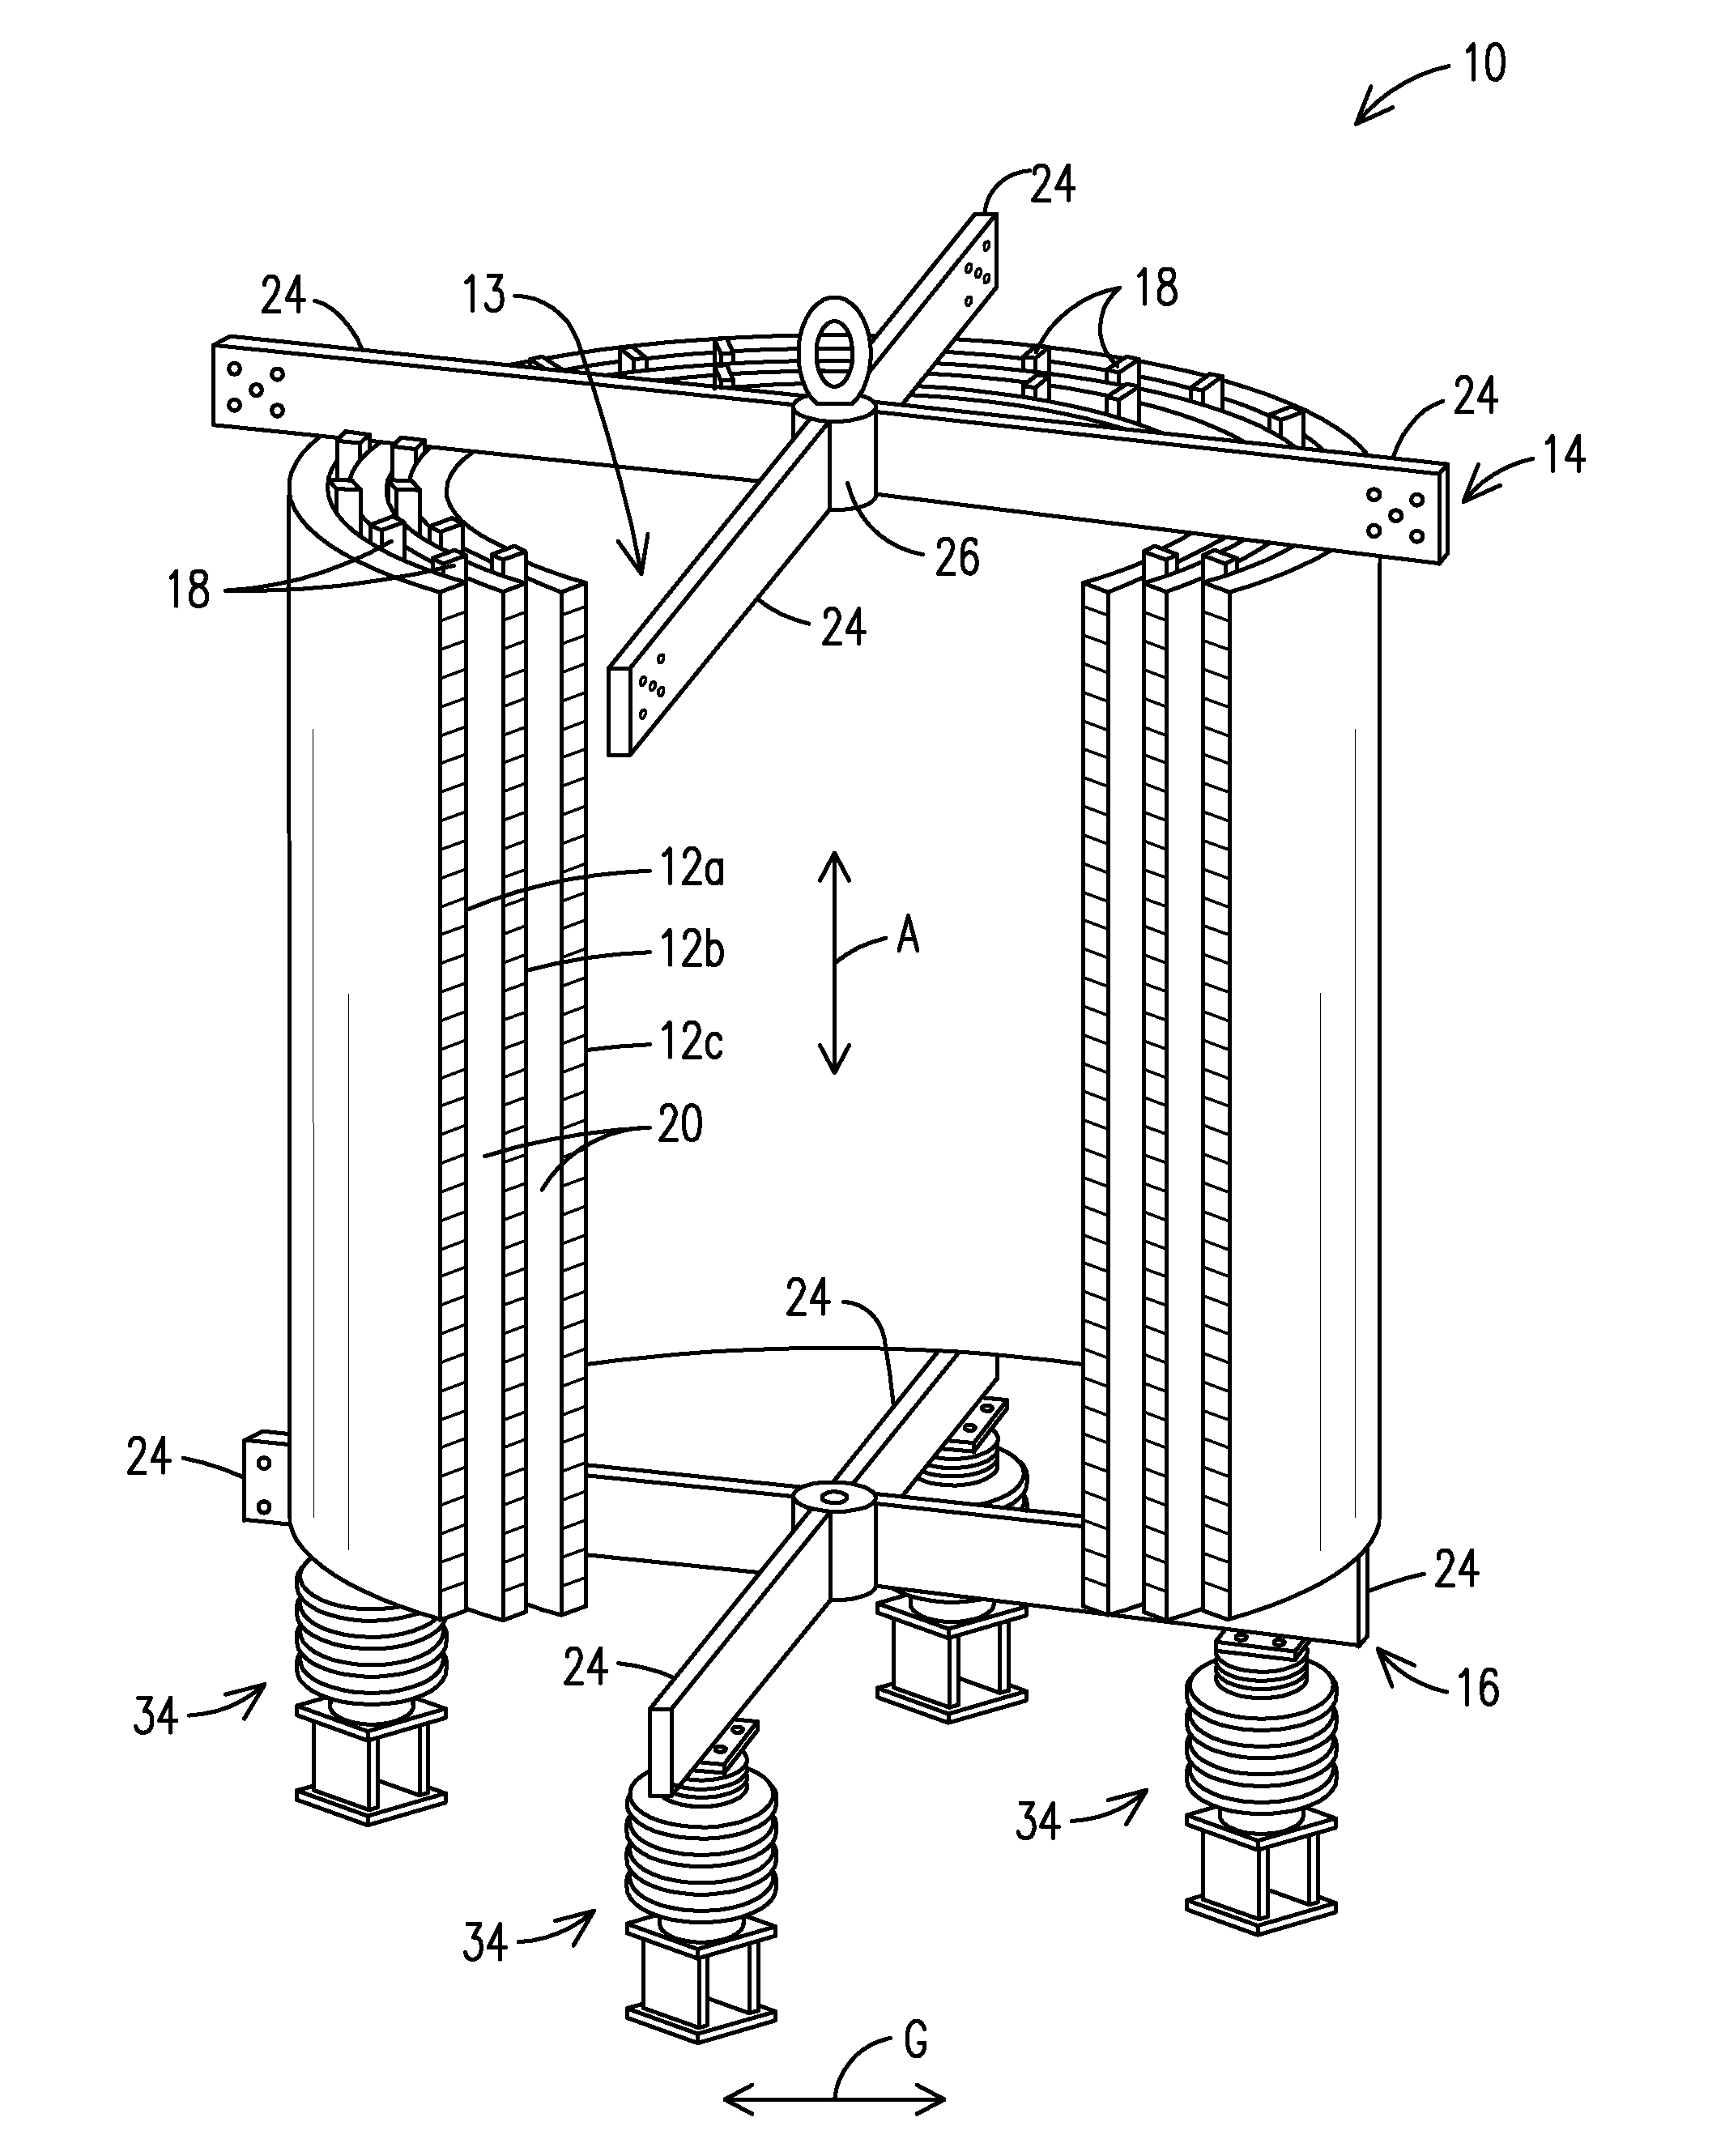 Integrated sound shield for air core reactor